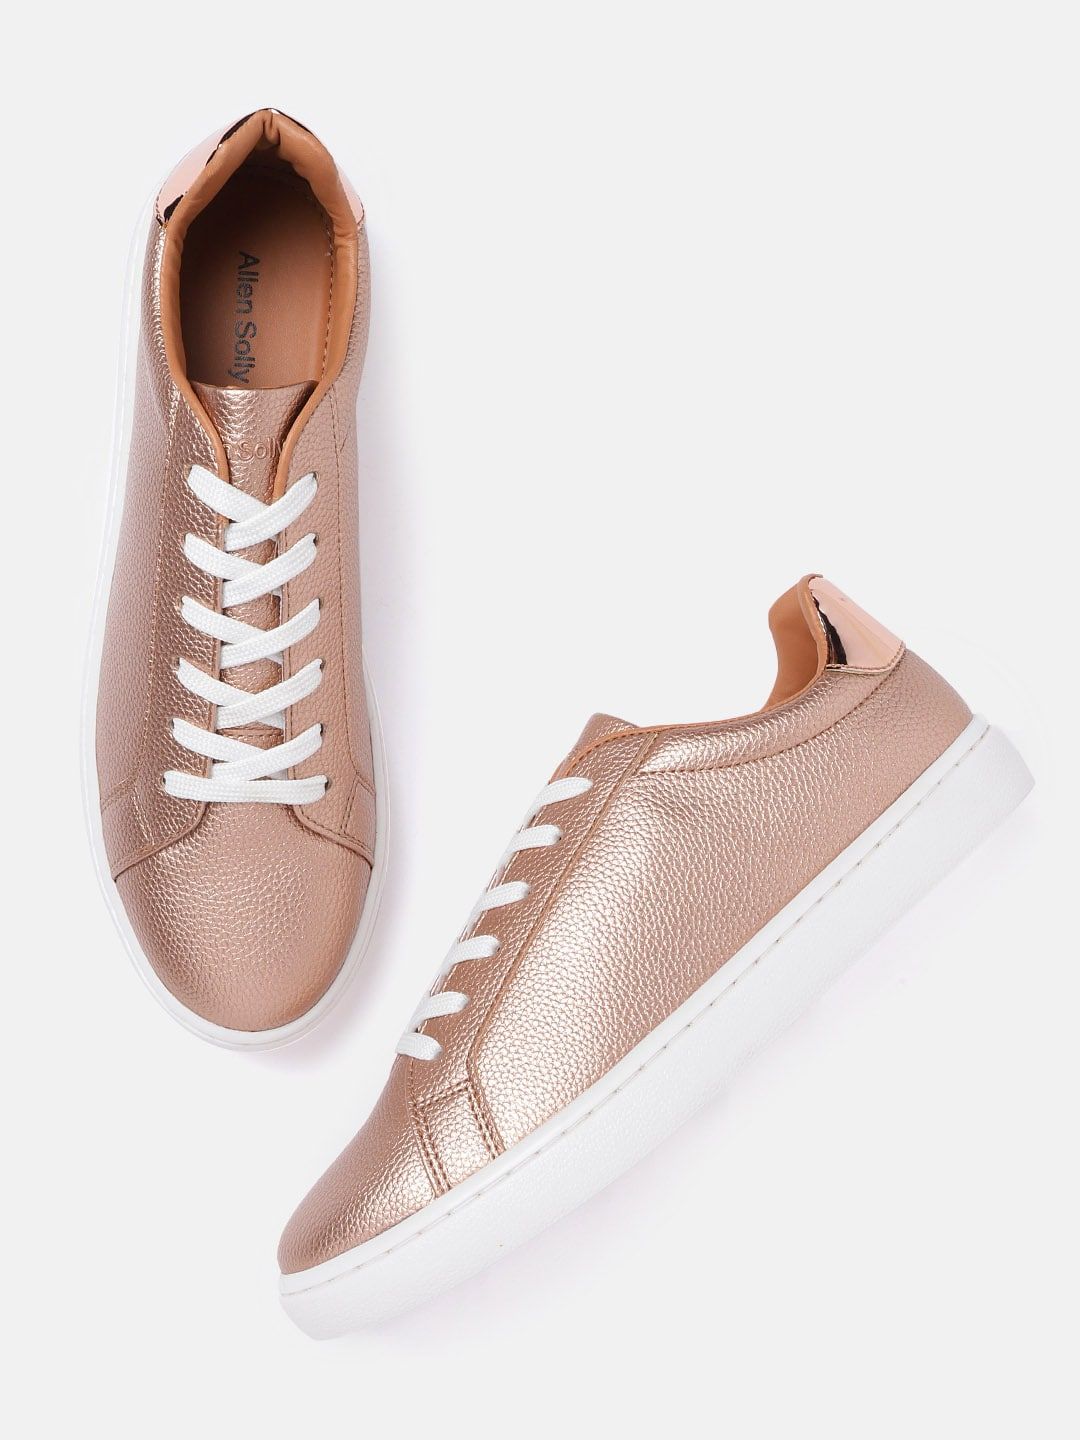 Allen Solly Women Rose Gold-Toned Solid Sneakers Price in India